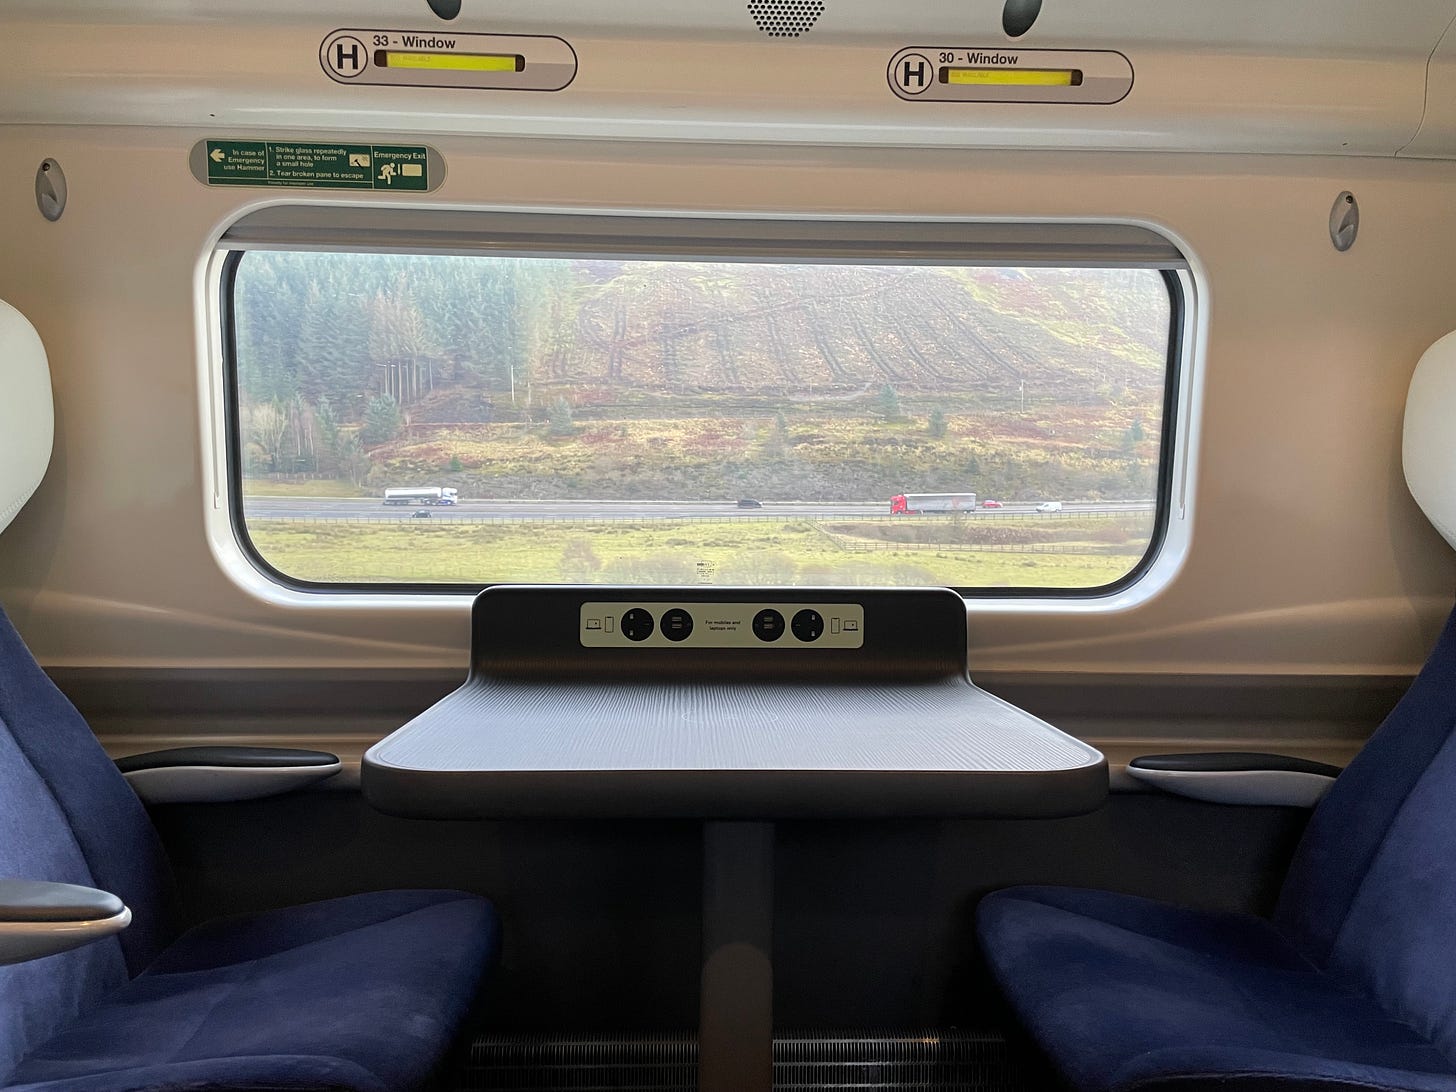 picture looking out of a window of a train, with two seats and a table in the foreground. two lorries and 4 cars are passing on a nearby road